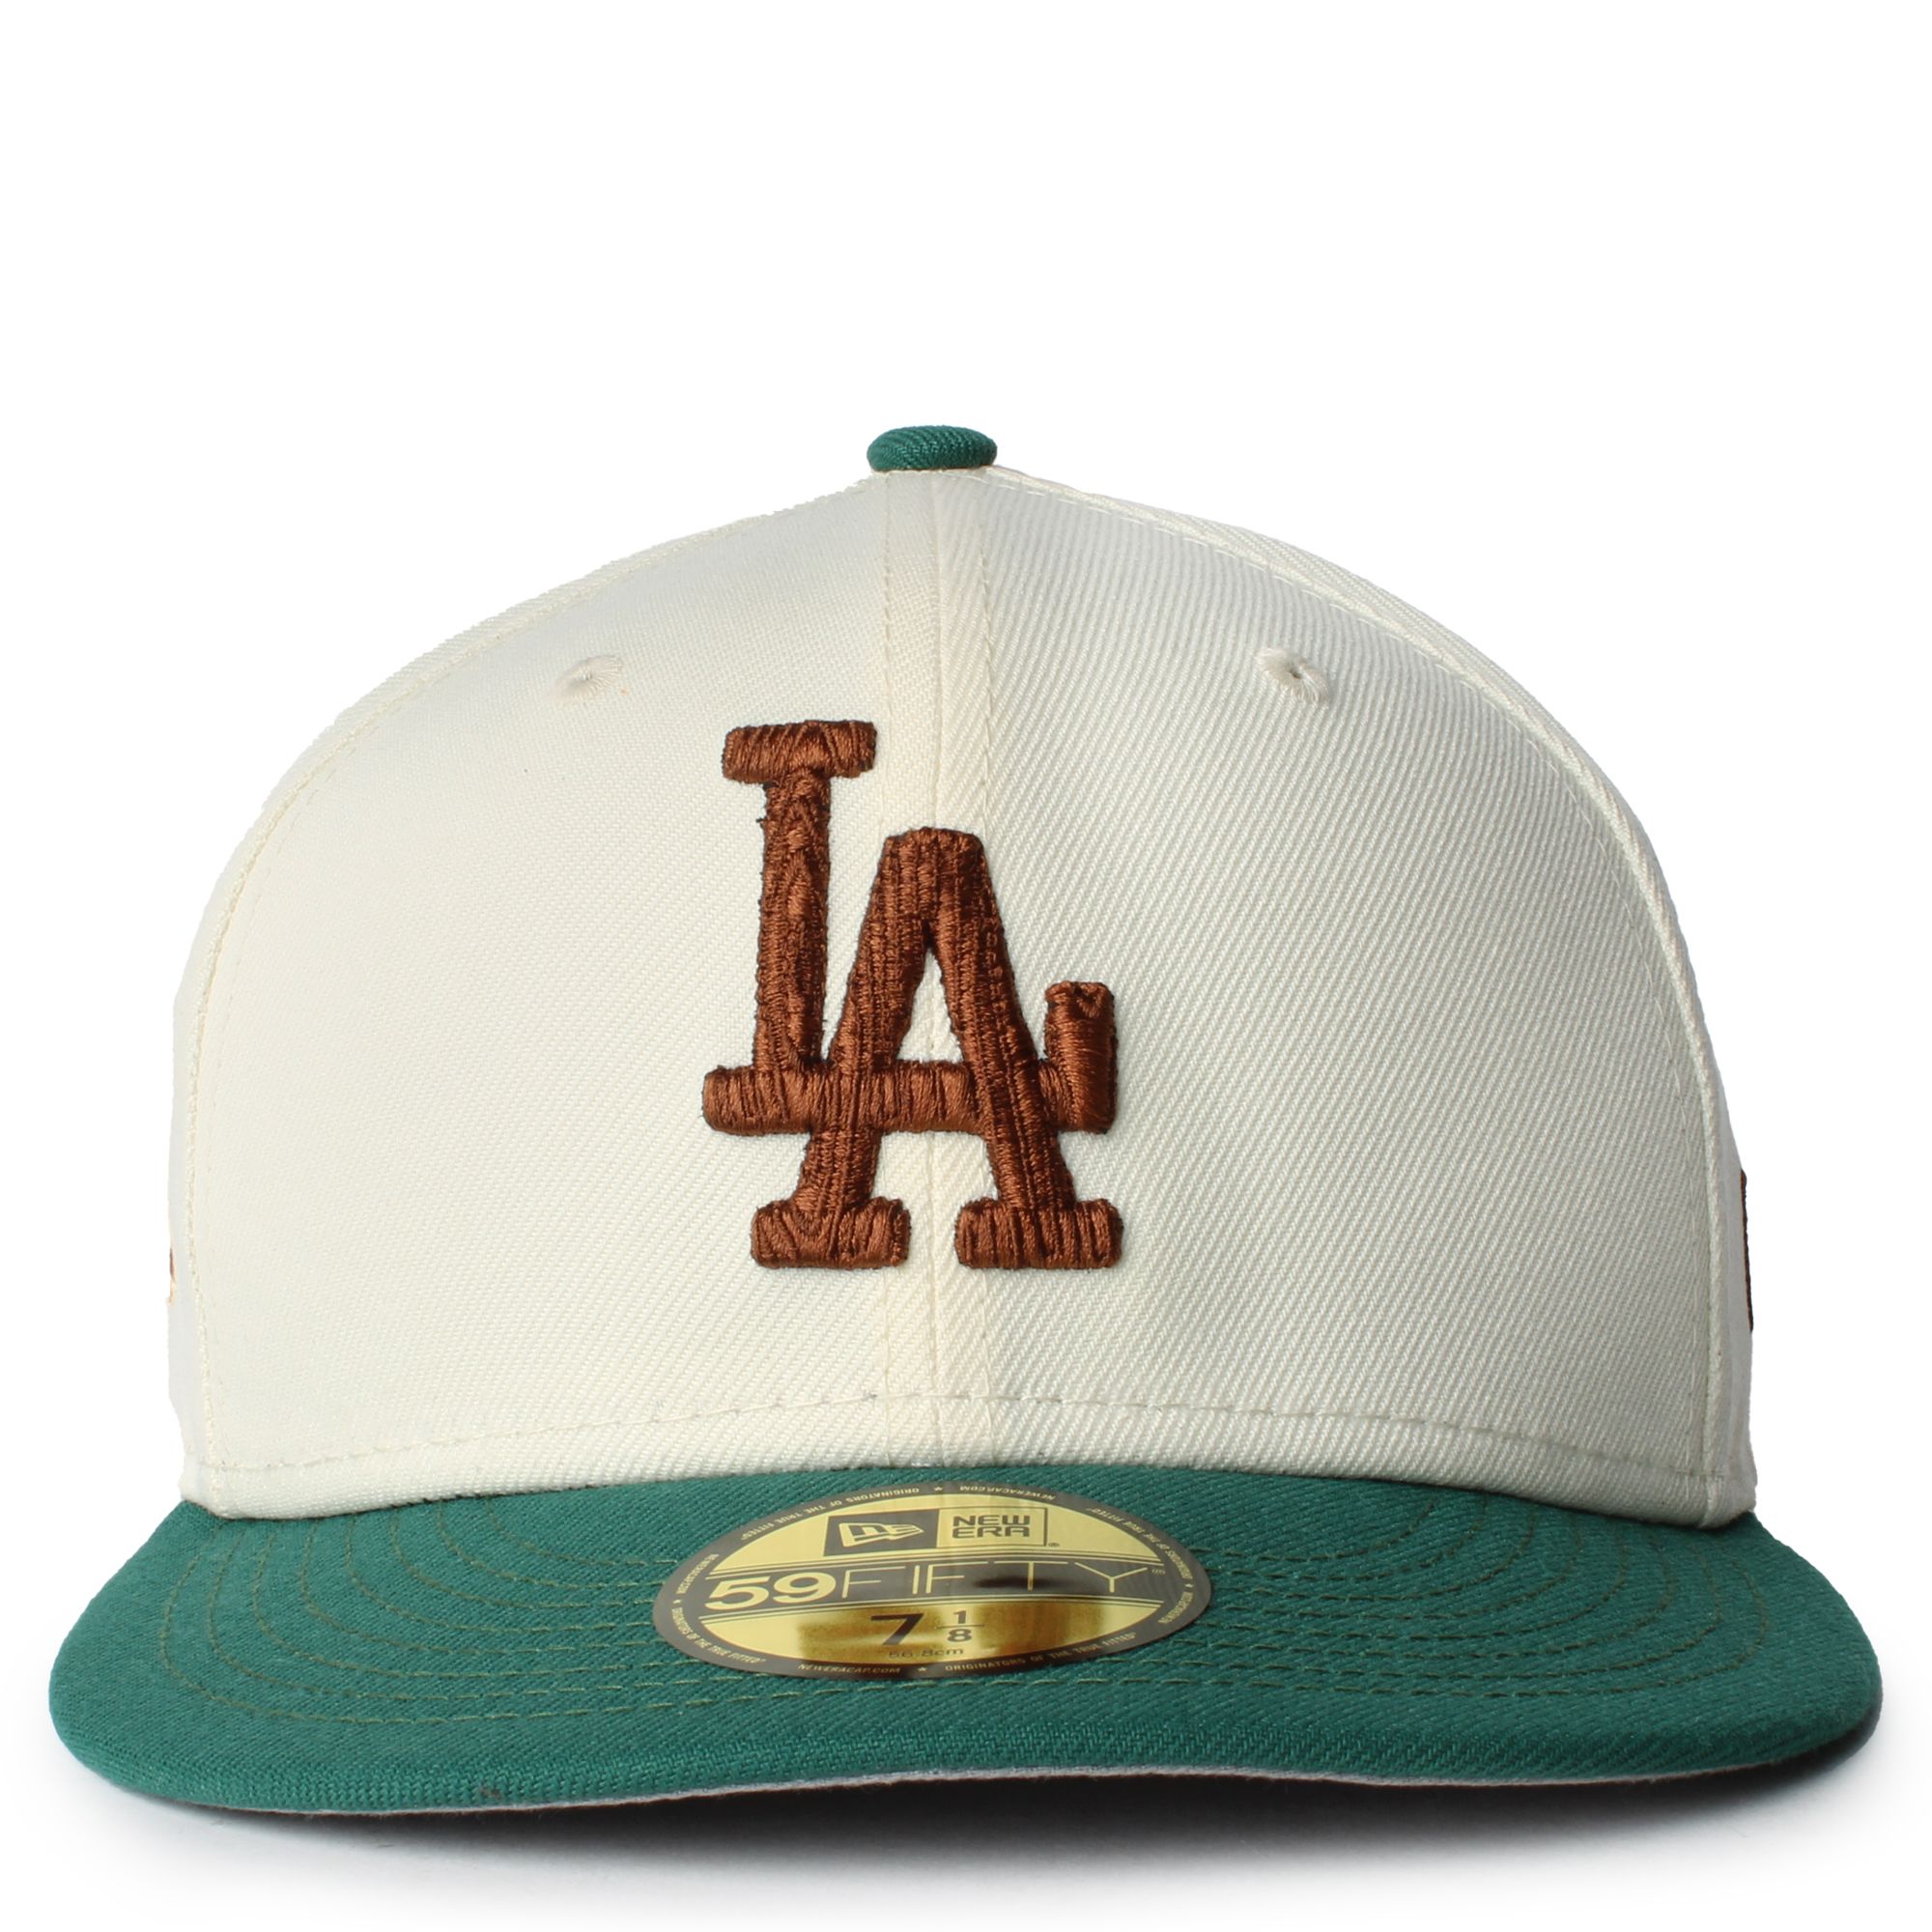 The 31 Top-Selling Los Angeles Dodger Jerseys, T-Shirts, & Baseball Caps